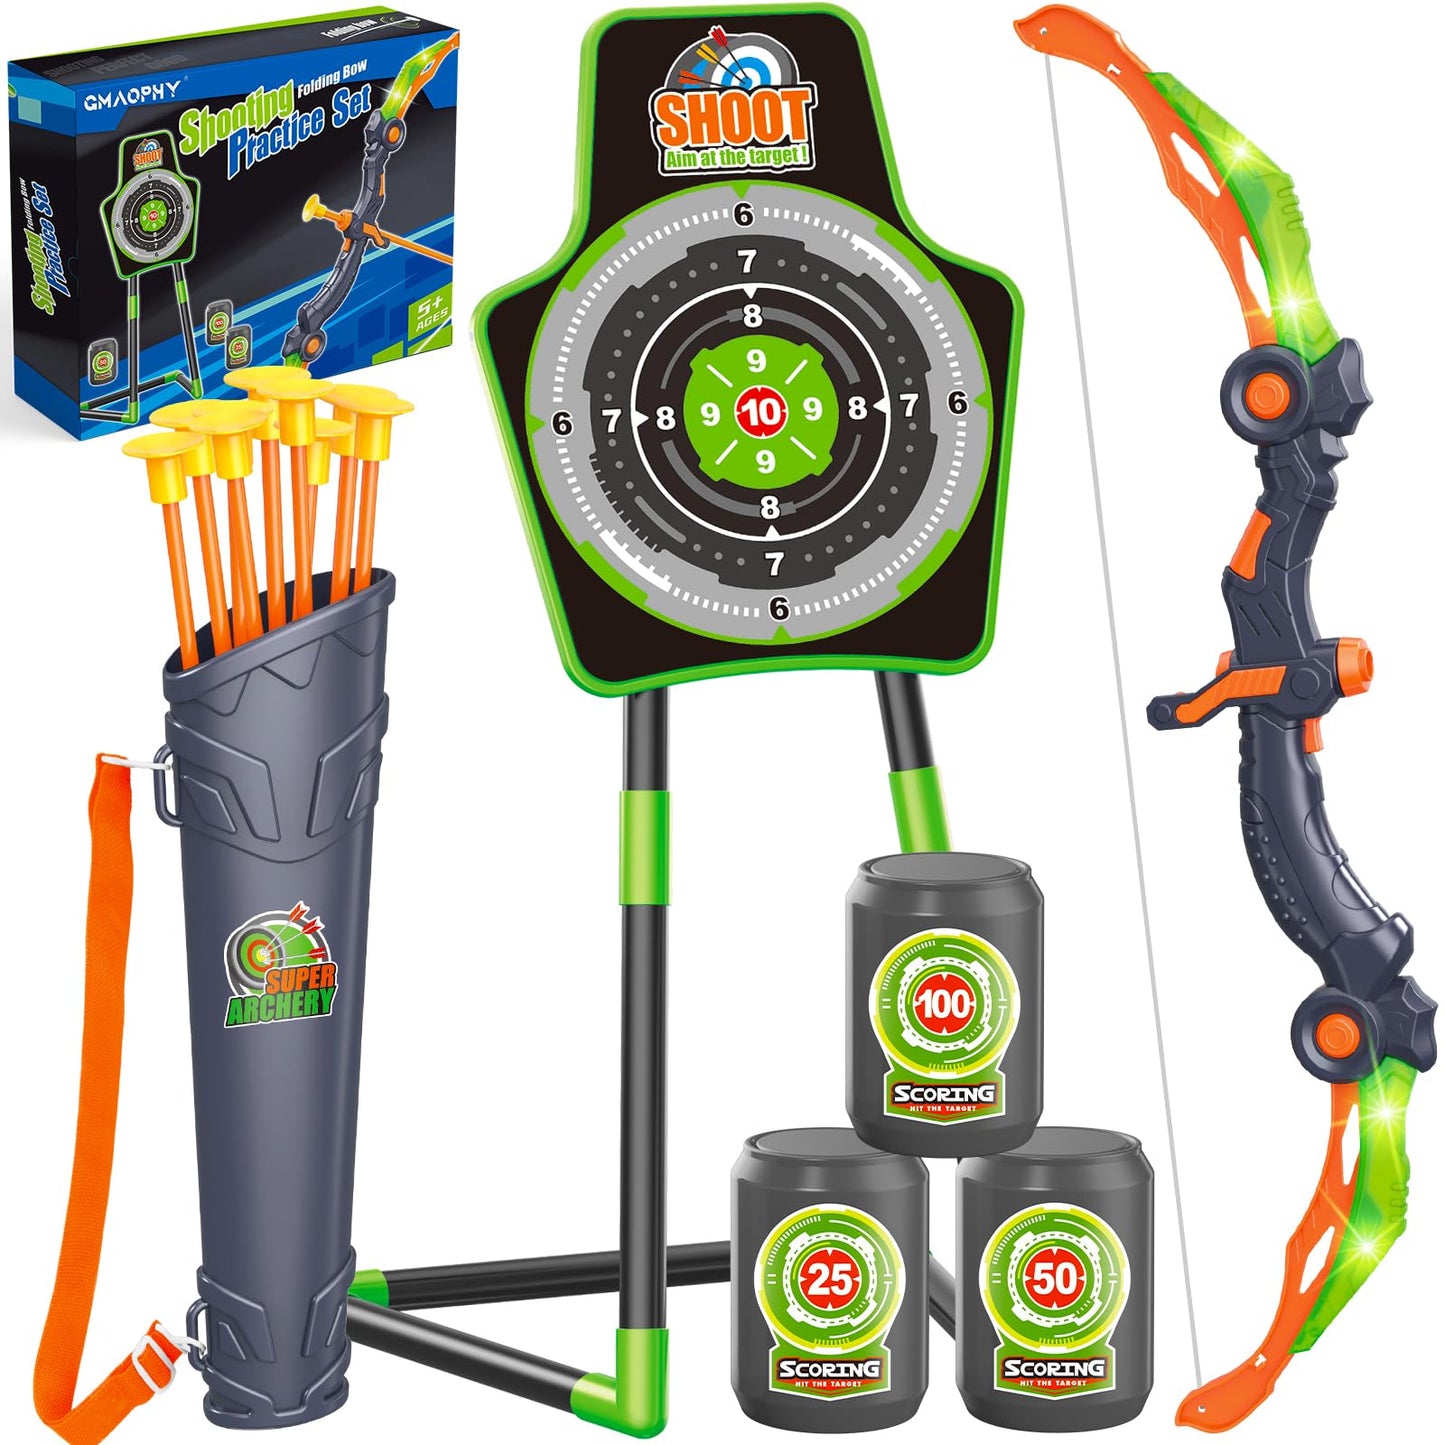 Bow and Arrow Toys for Kids, Archery Set Includes Super Bow with LED Lights, 10 Suction Cups Arrows,Archery Set with Standing Target and 3 Target Cans for Boys Girls